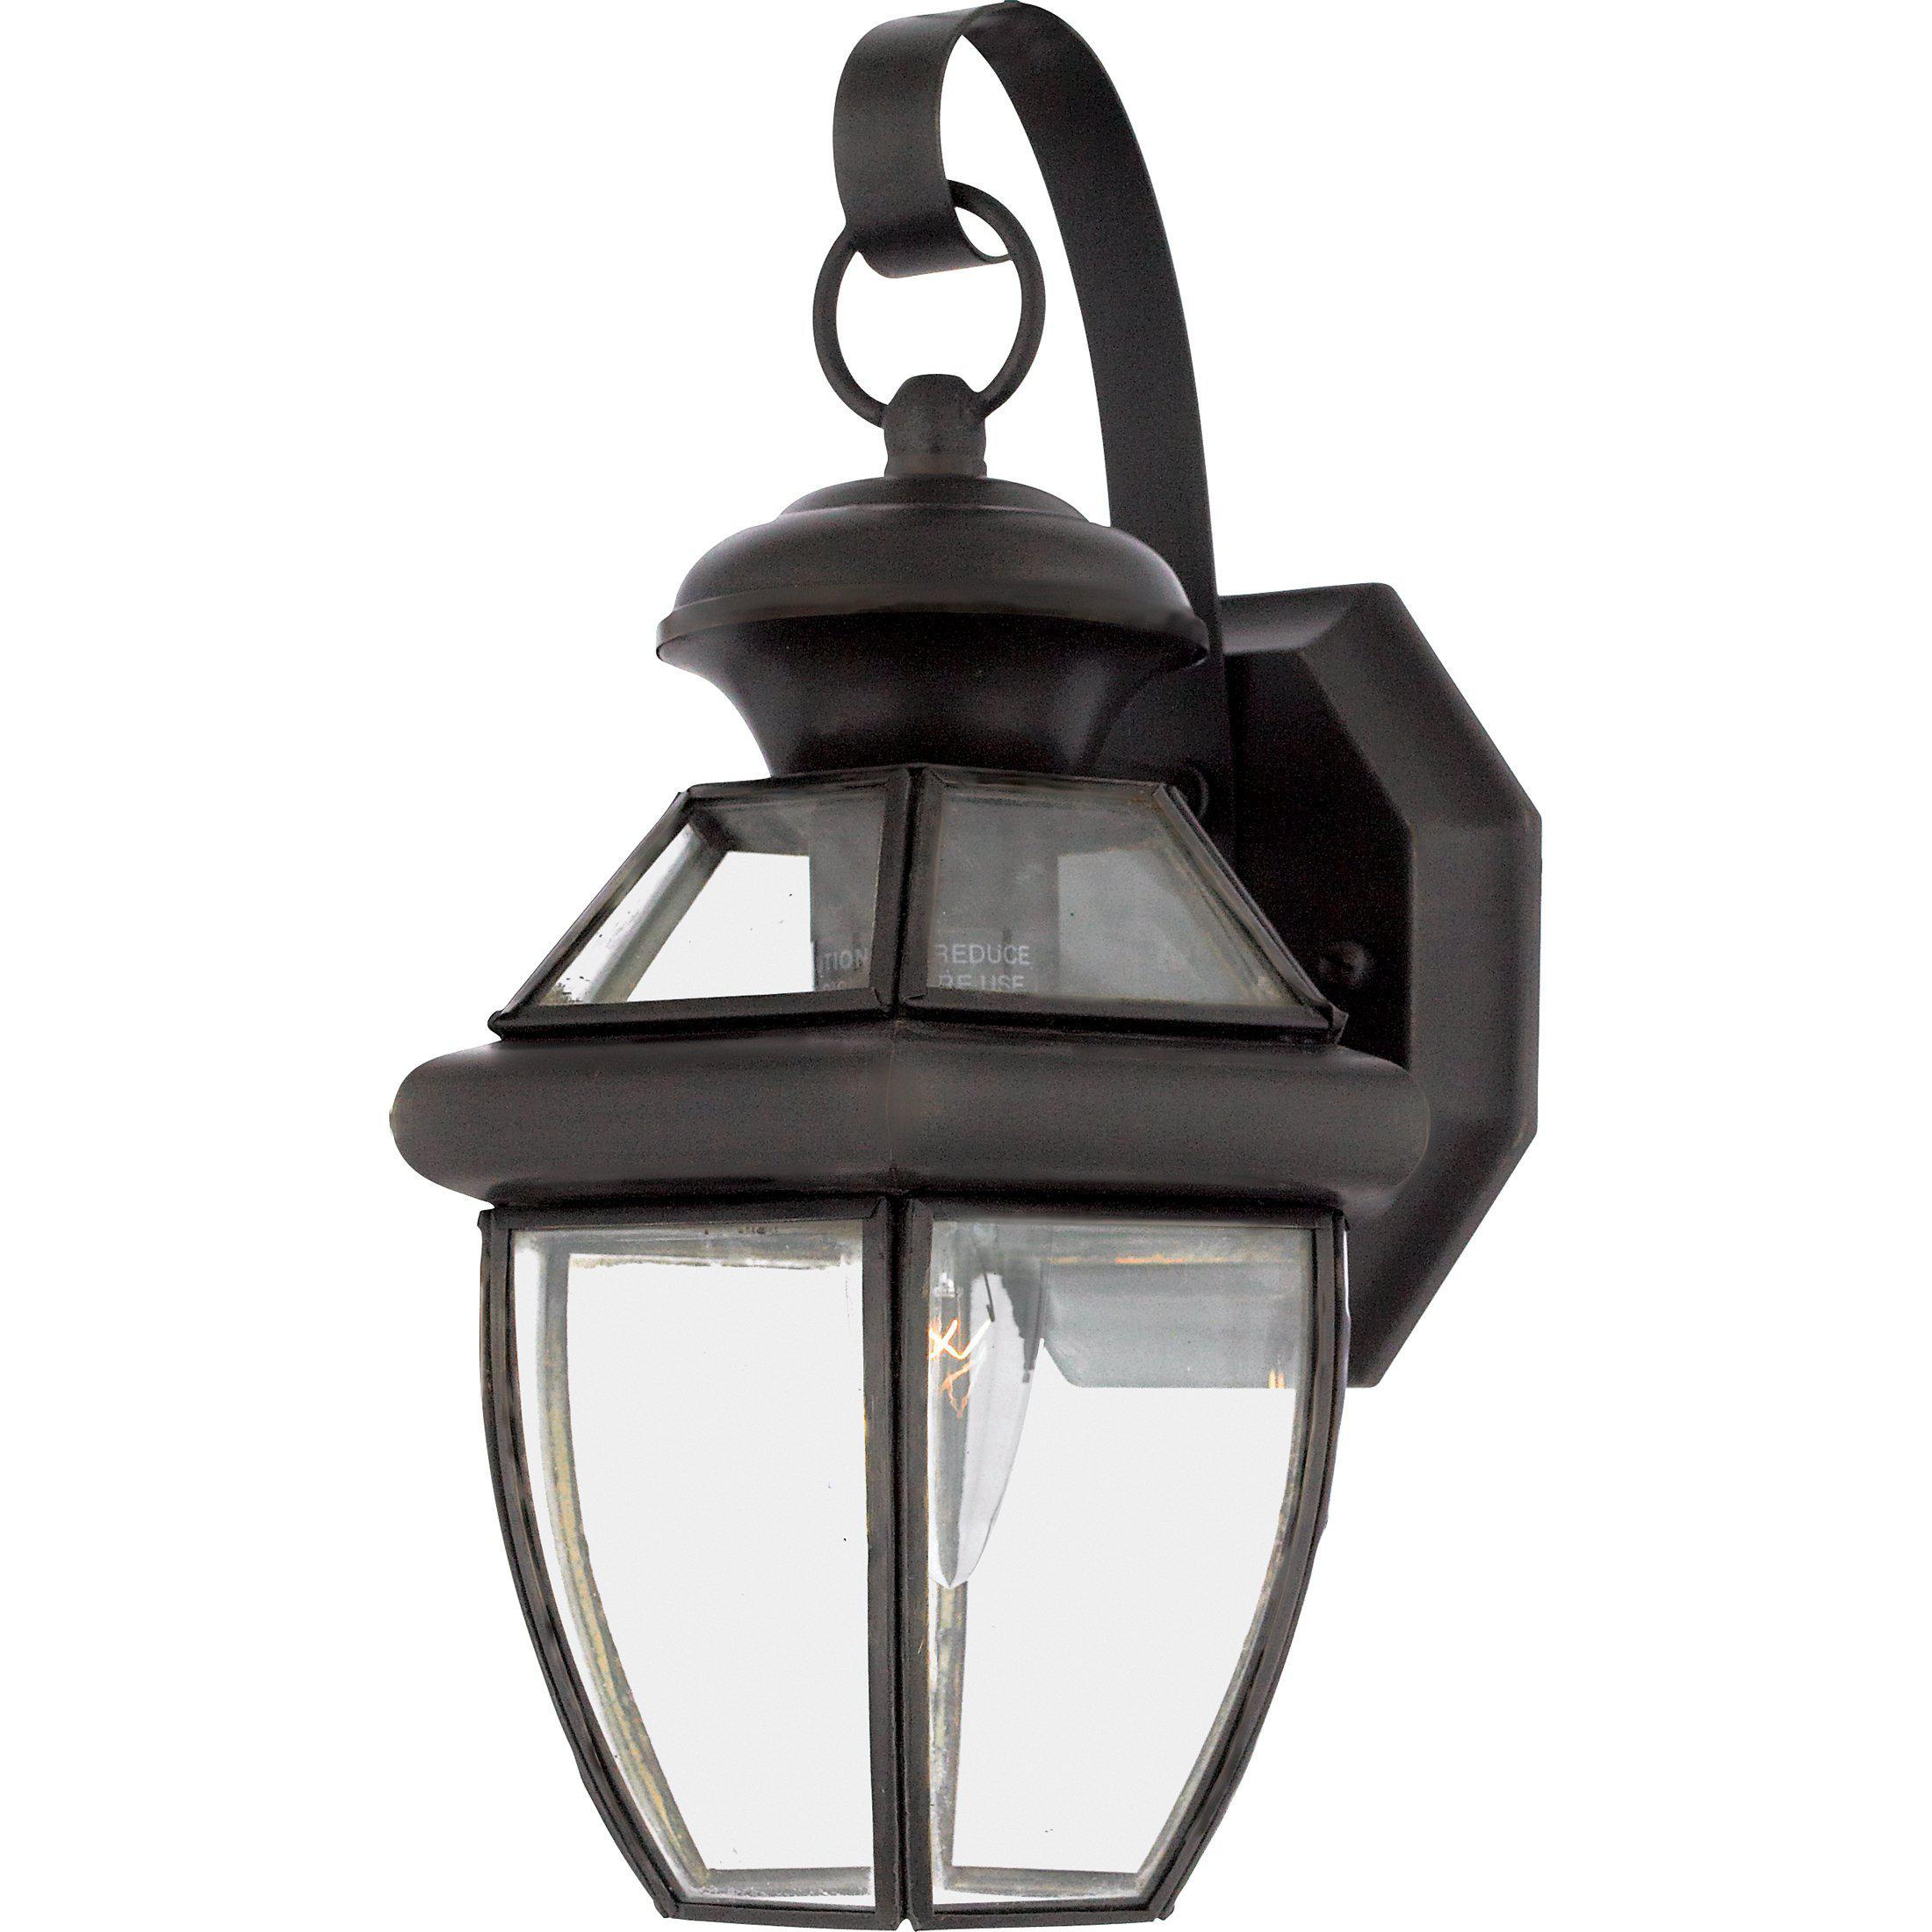 Quoizel  Newbury Outdoor Lantern, Small On-Sale Outdoor l Wall Quoizel Inc   